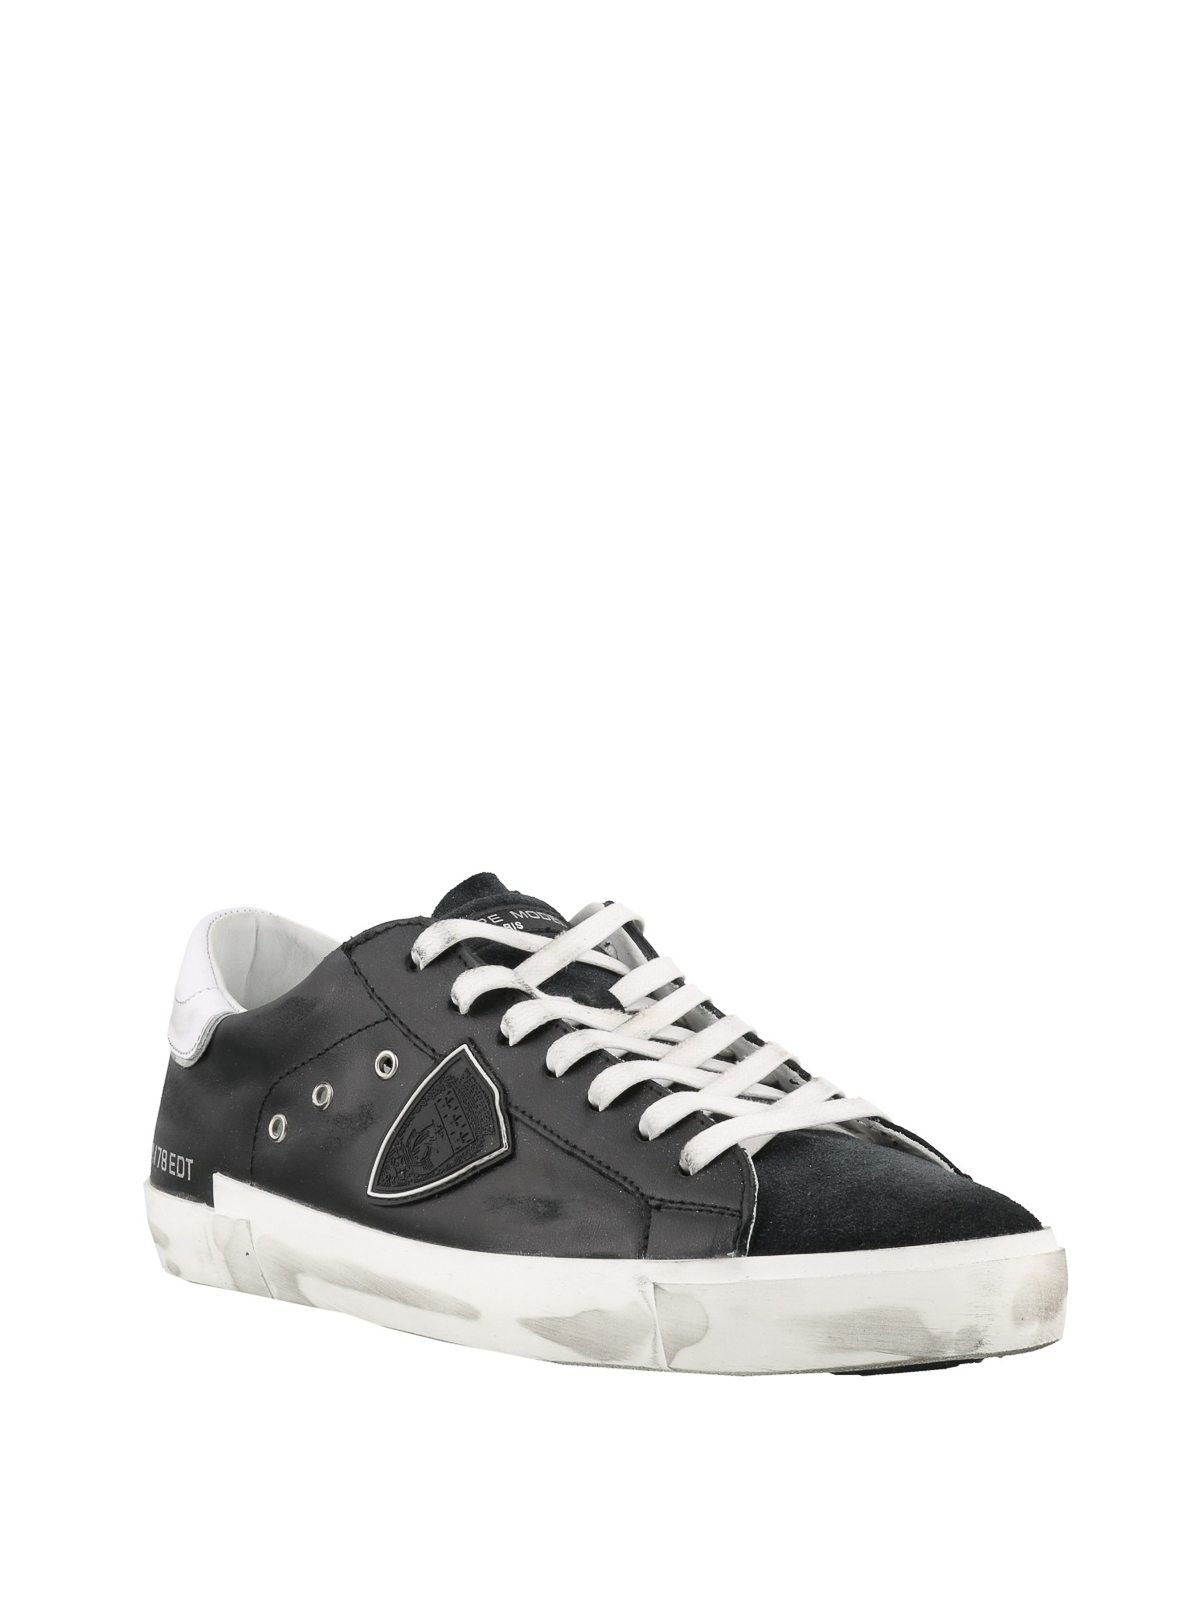 Trainers Philippe Model - Prsx sneakers - PRLUVS01 | Shop online at iKRIX